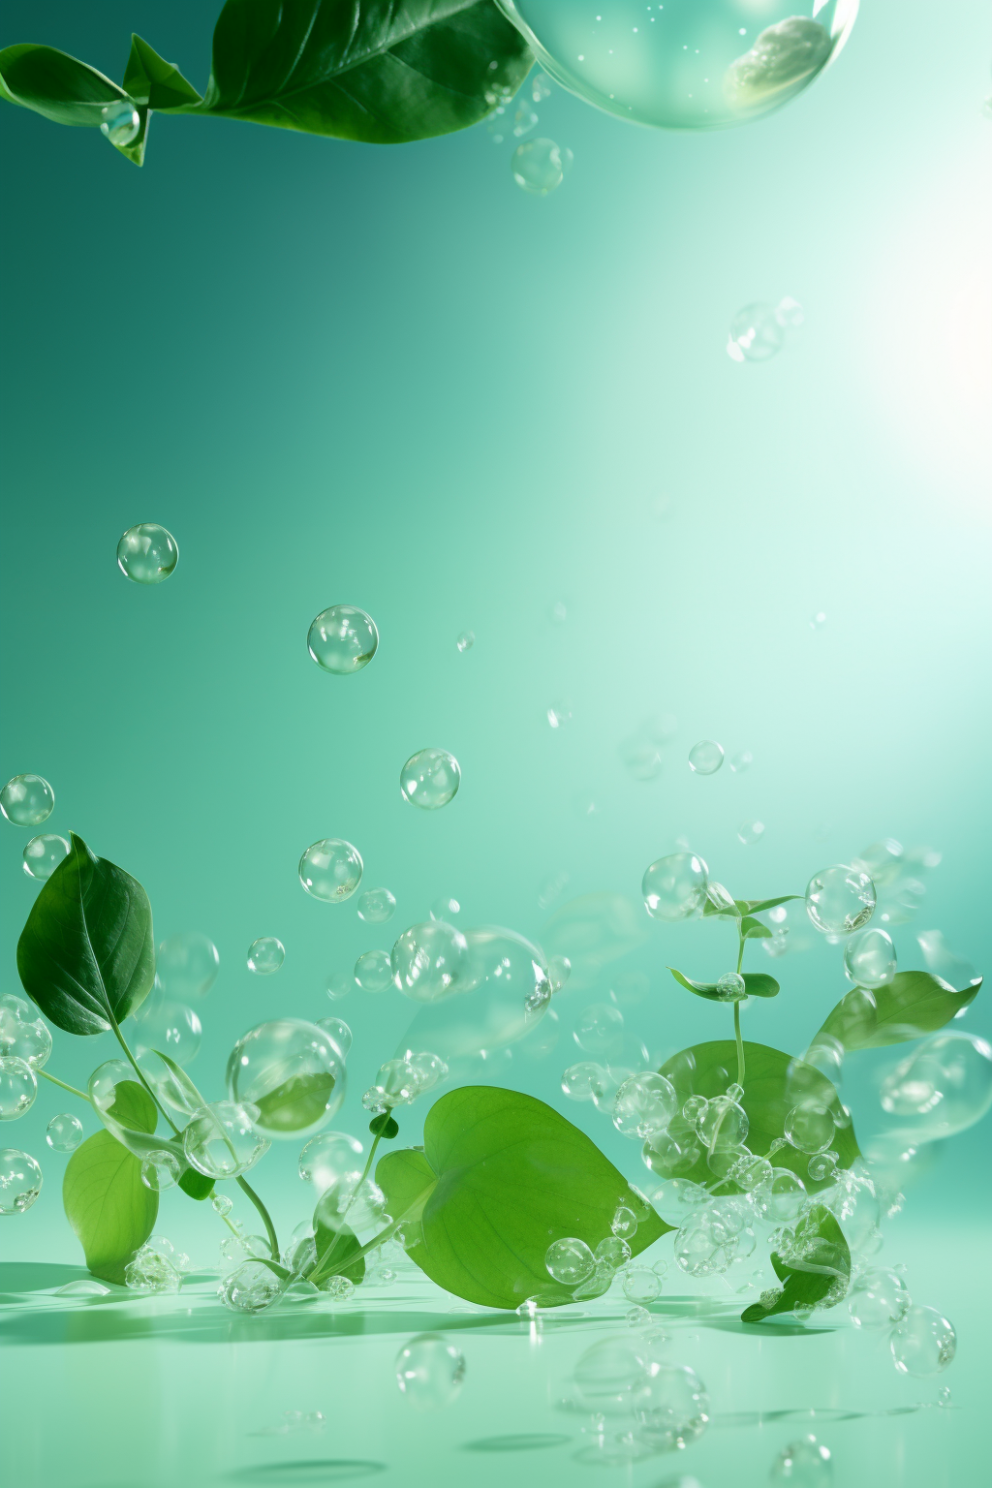 phengrant_rich_vivid_leaf_green_backdrop_seamless_floating_abst_6dc1a2f8-7846-4034-afab-0e3f753b1385.png